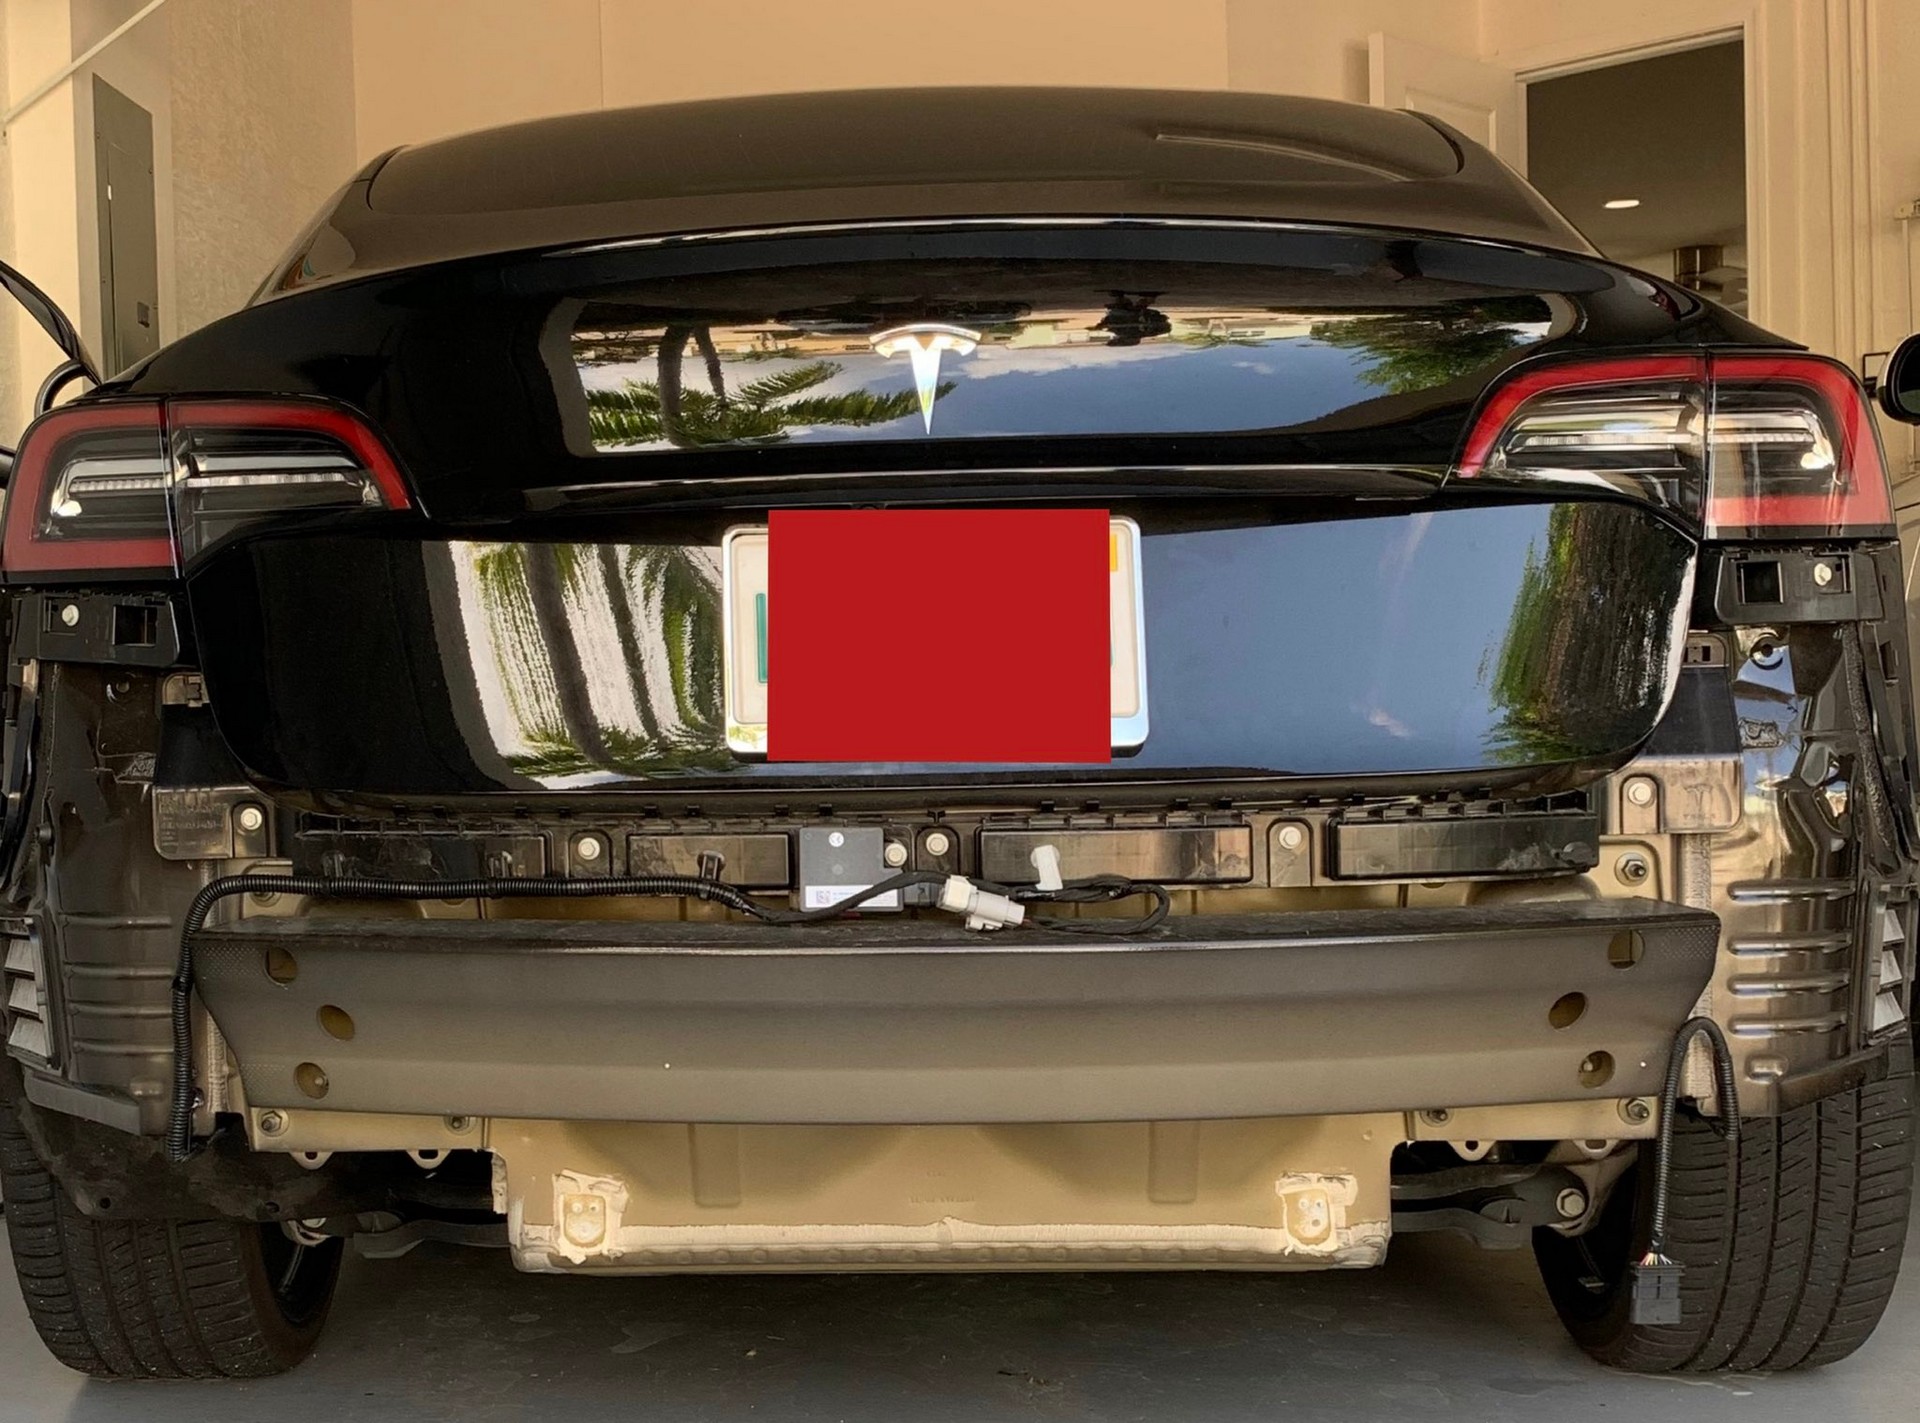 Act Of God” Or Dismal Build Quality? Tesla Model 3 Loses Bumper